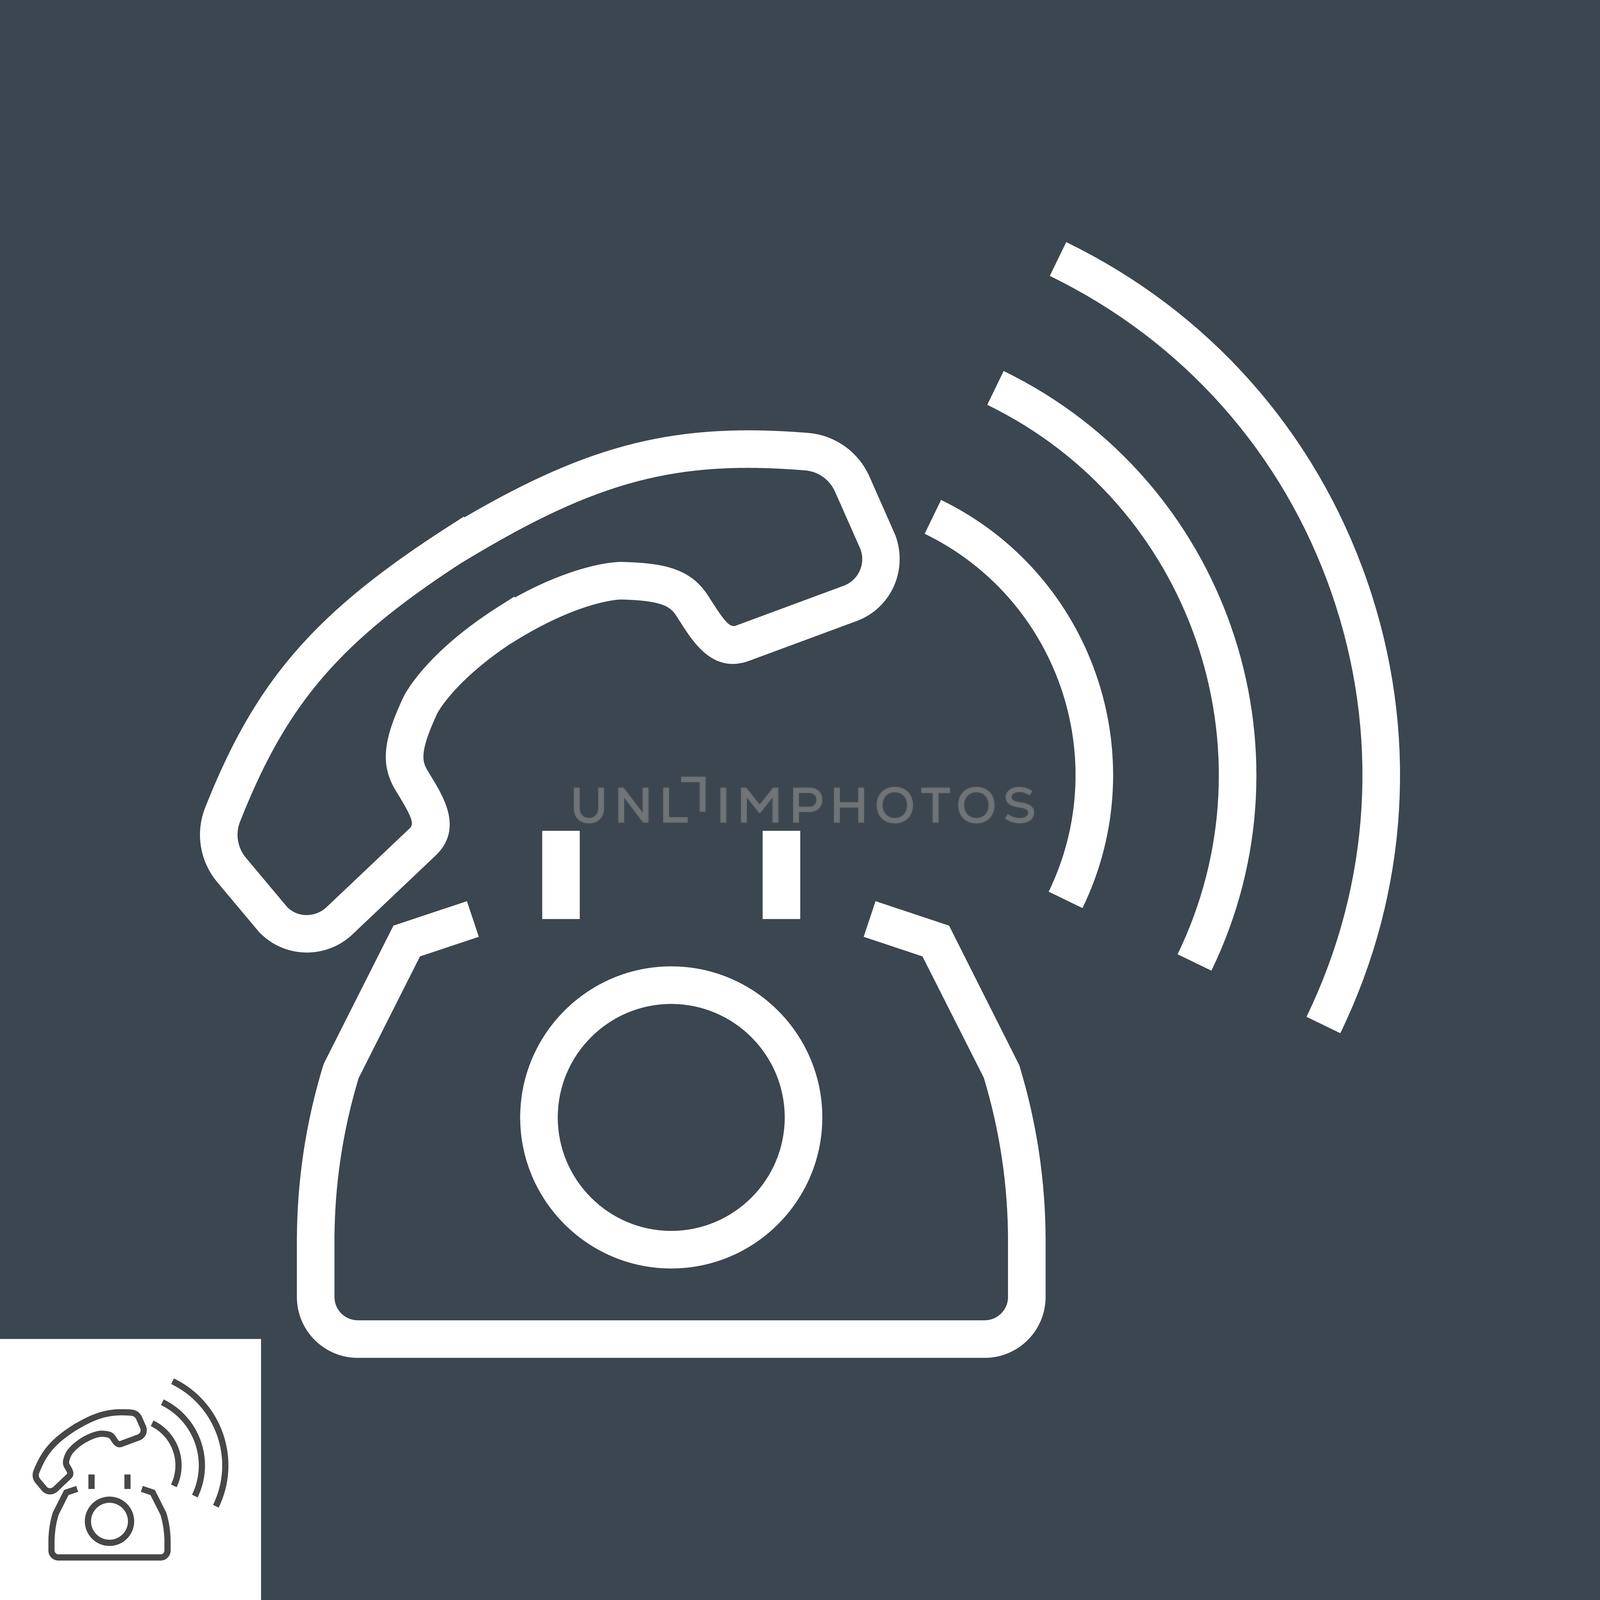 Phone Thin Line Vector Icon. Flat icon isolated on the black background. Editable EPS file. Vector illustration.